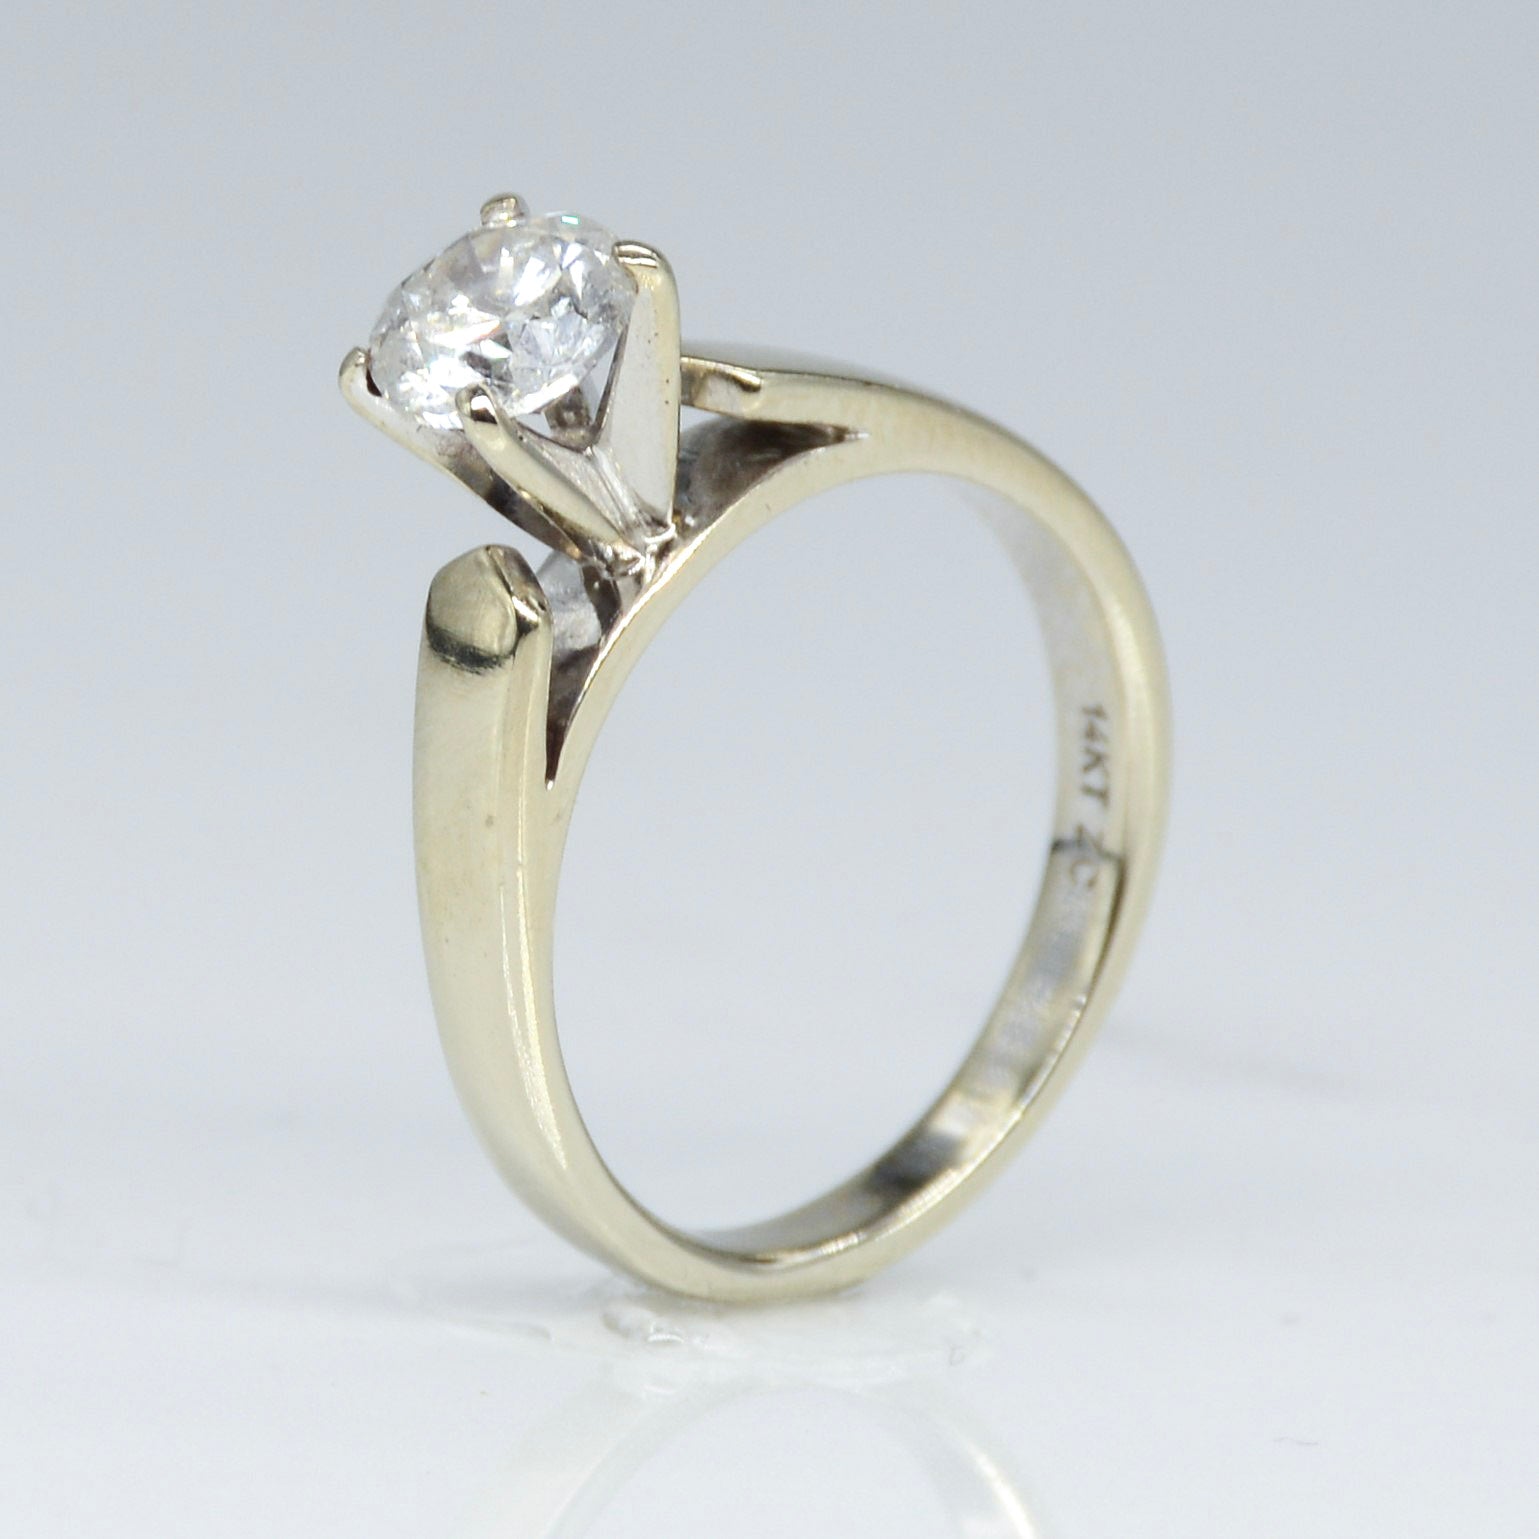 White Gold Diamond Solitaire Engagement Ring | SZ 5.25 |